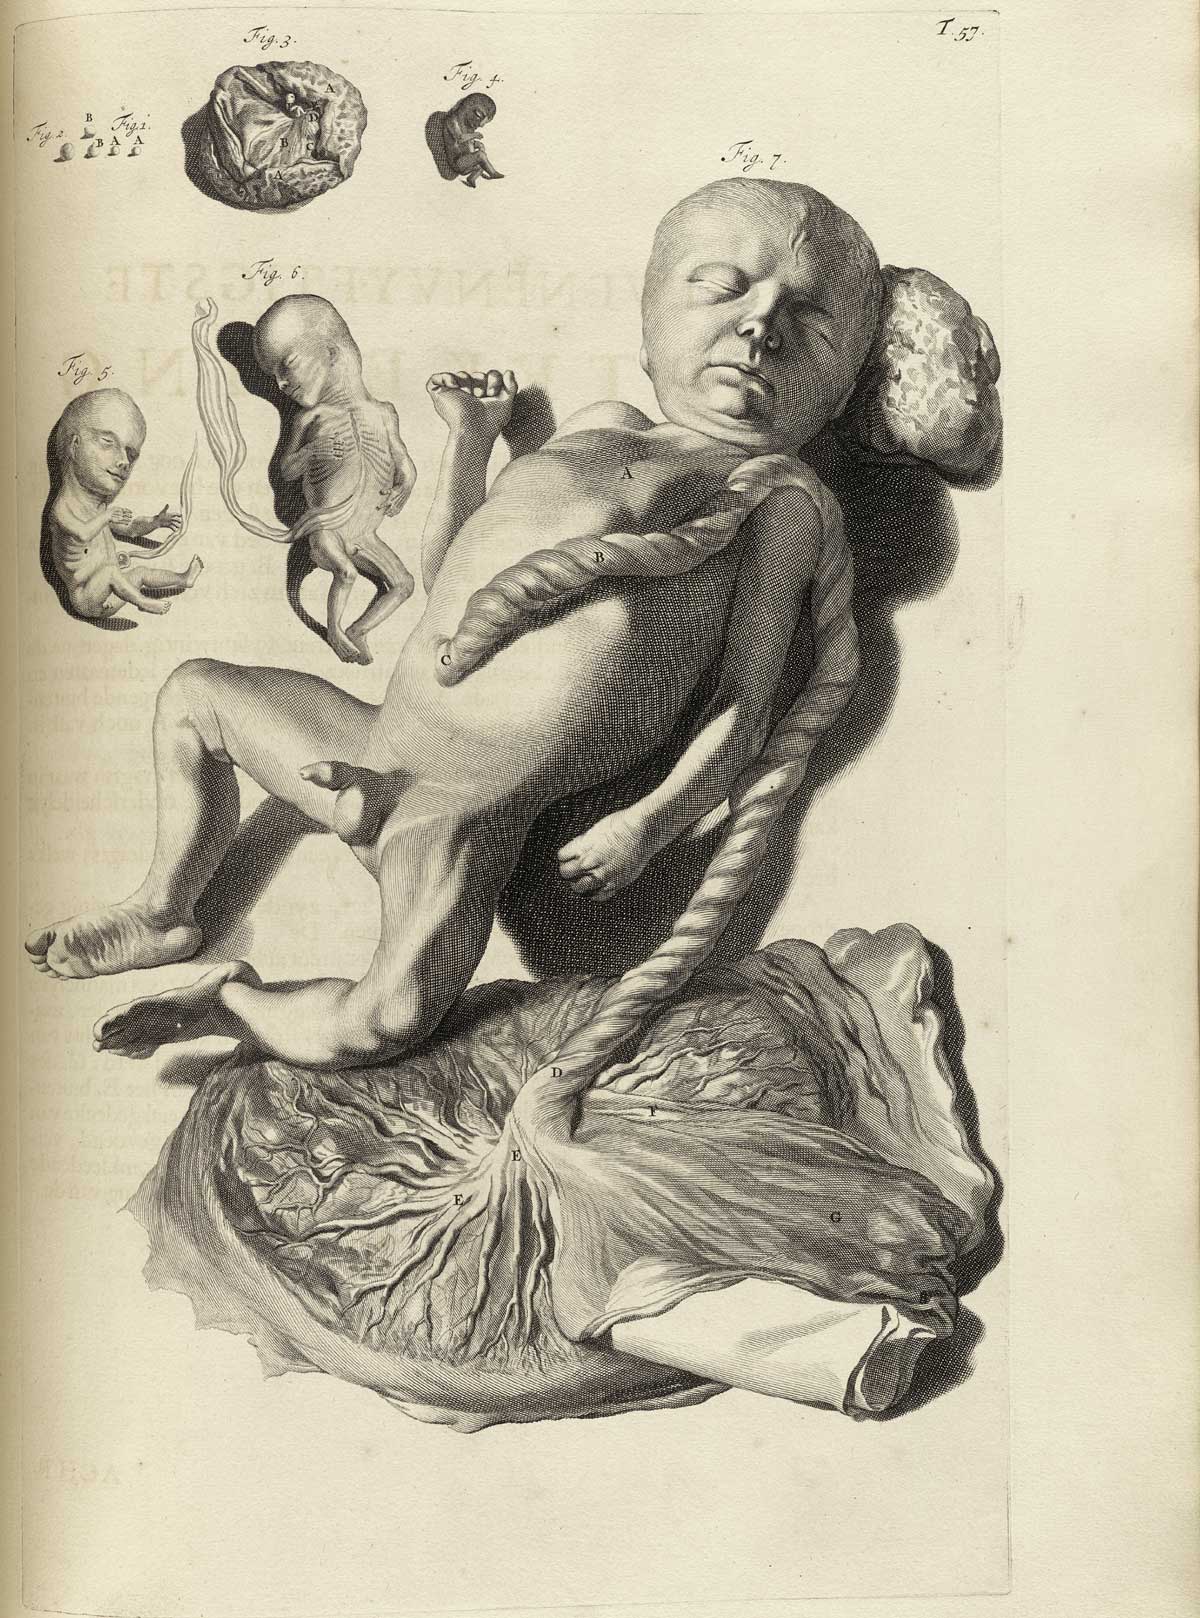 Engraving of four fetuses in various stages of development laying on a dissection table; the largest in the center takes up about three-quarters of the page, a male child laying on its back with a large umbilical cord leading to a fully developed placenta laying at its feet; the other fetuses are small and less developed in the upper left corner, with a small placenta and smaller clusters of cells forming the earliest stages of life; from Govard Bidloo’s Ontleding Des Menschelyken Lichaams, Amsterdam, 1690, NLM Call no. WZ 250 B5855anDu 1690.